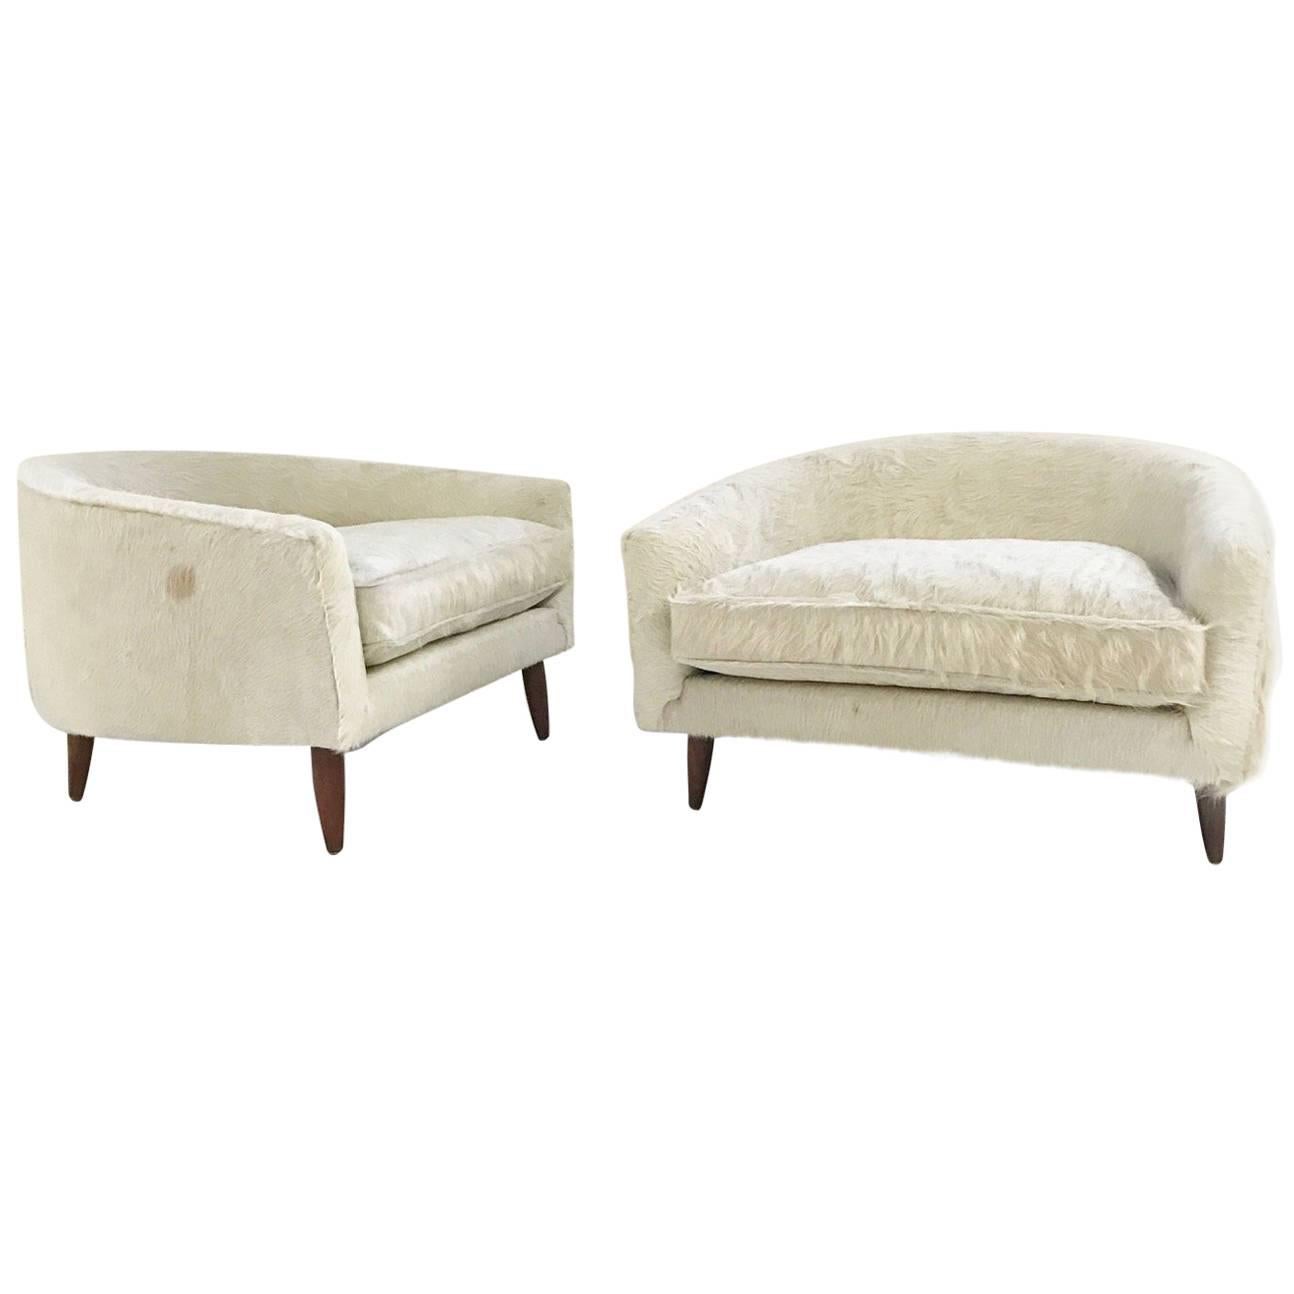 Pair of Rare Adrian Pearsall Cloud Chairs Restored in Ivory Brazilian Cowhide